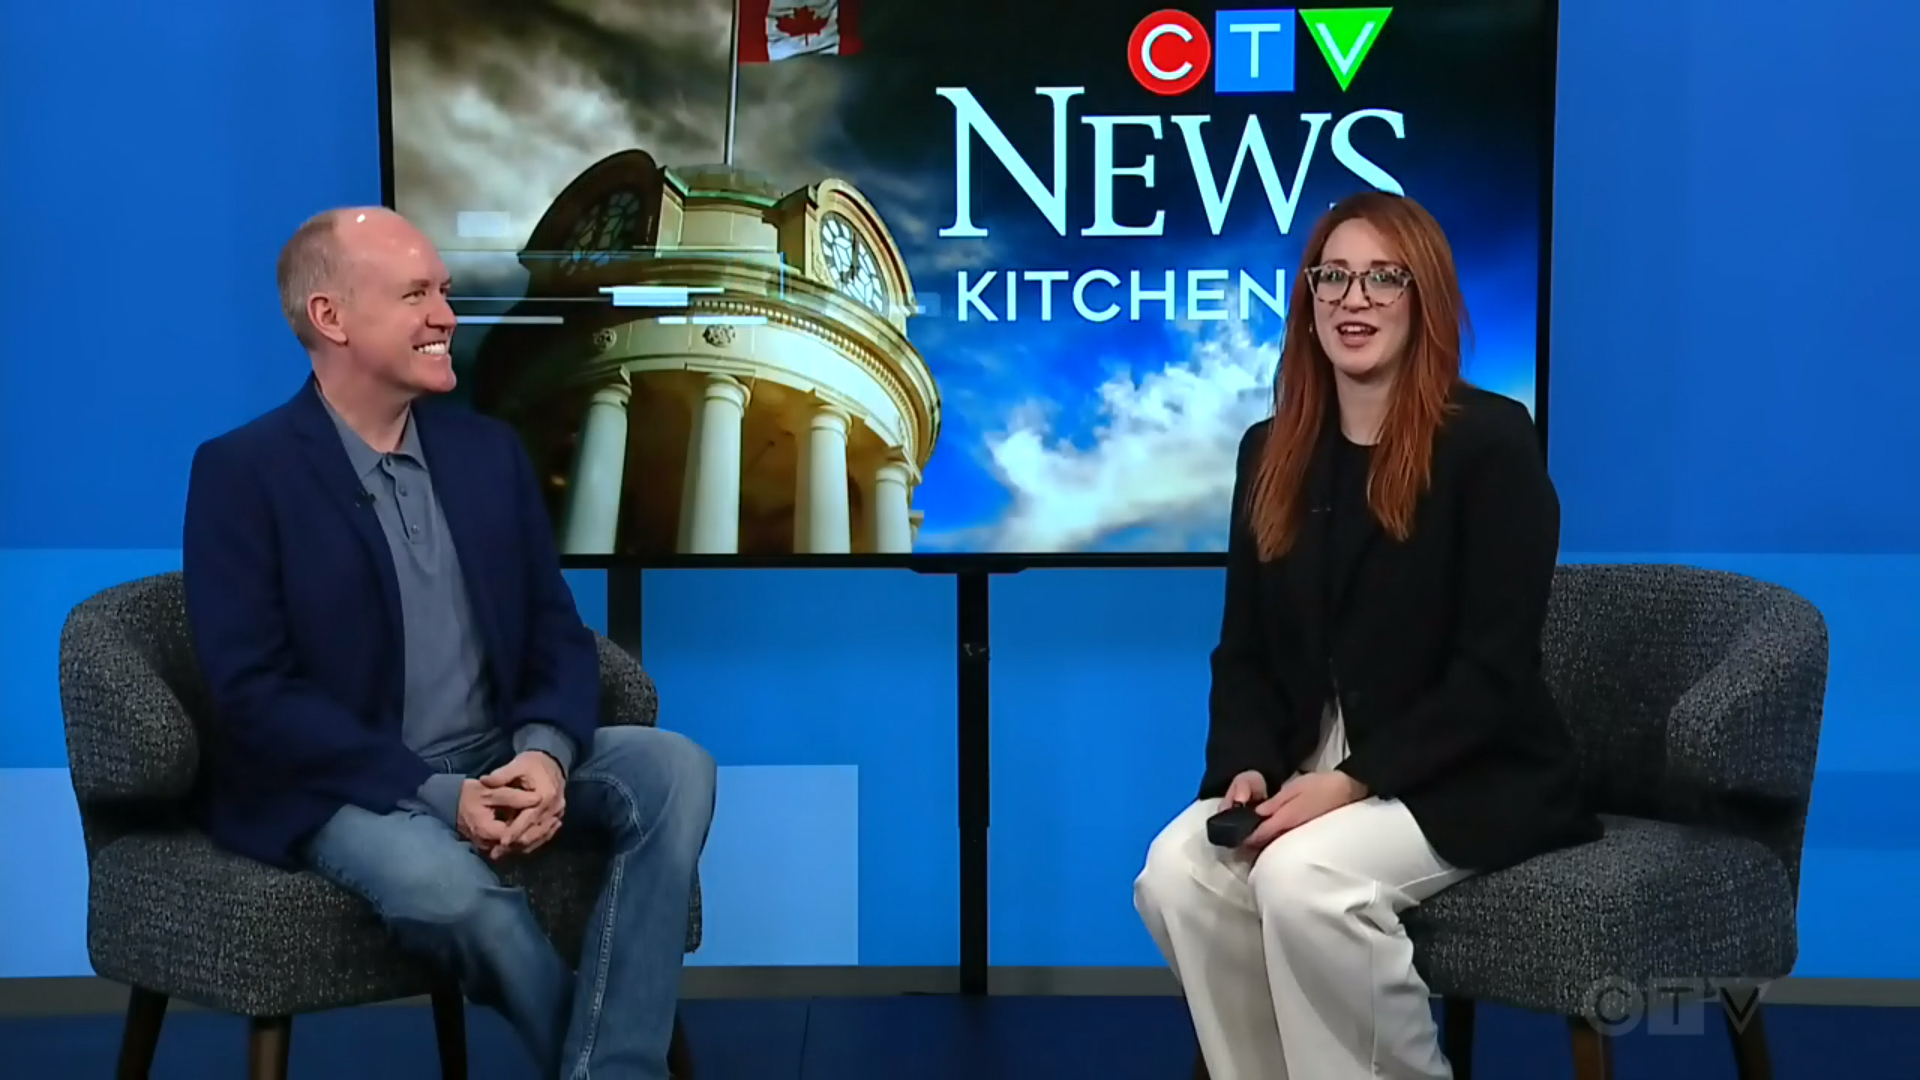 David Connolly and Daryl Morris sitting in front of a CTV News Kitchener backdrop. David wears a dark blue shirt and jeans, while Daryl on the right is dressed in a black blazer and white pants. Both are seated on grey upholstered chairs. The backdrop features the CTV News Kitchener logo, a clock tower, and the Canadian flag.